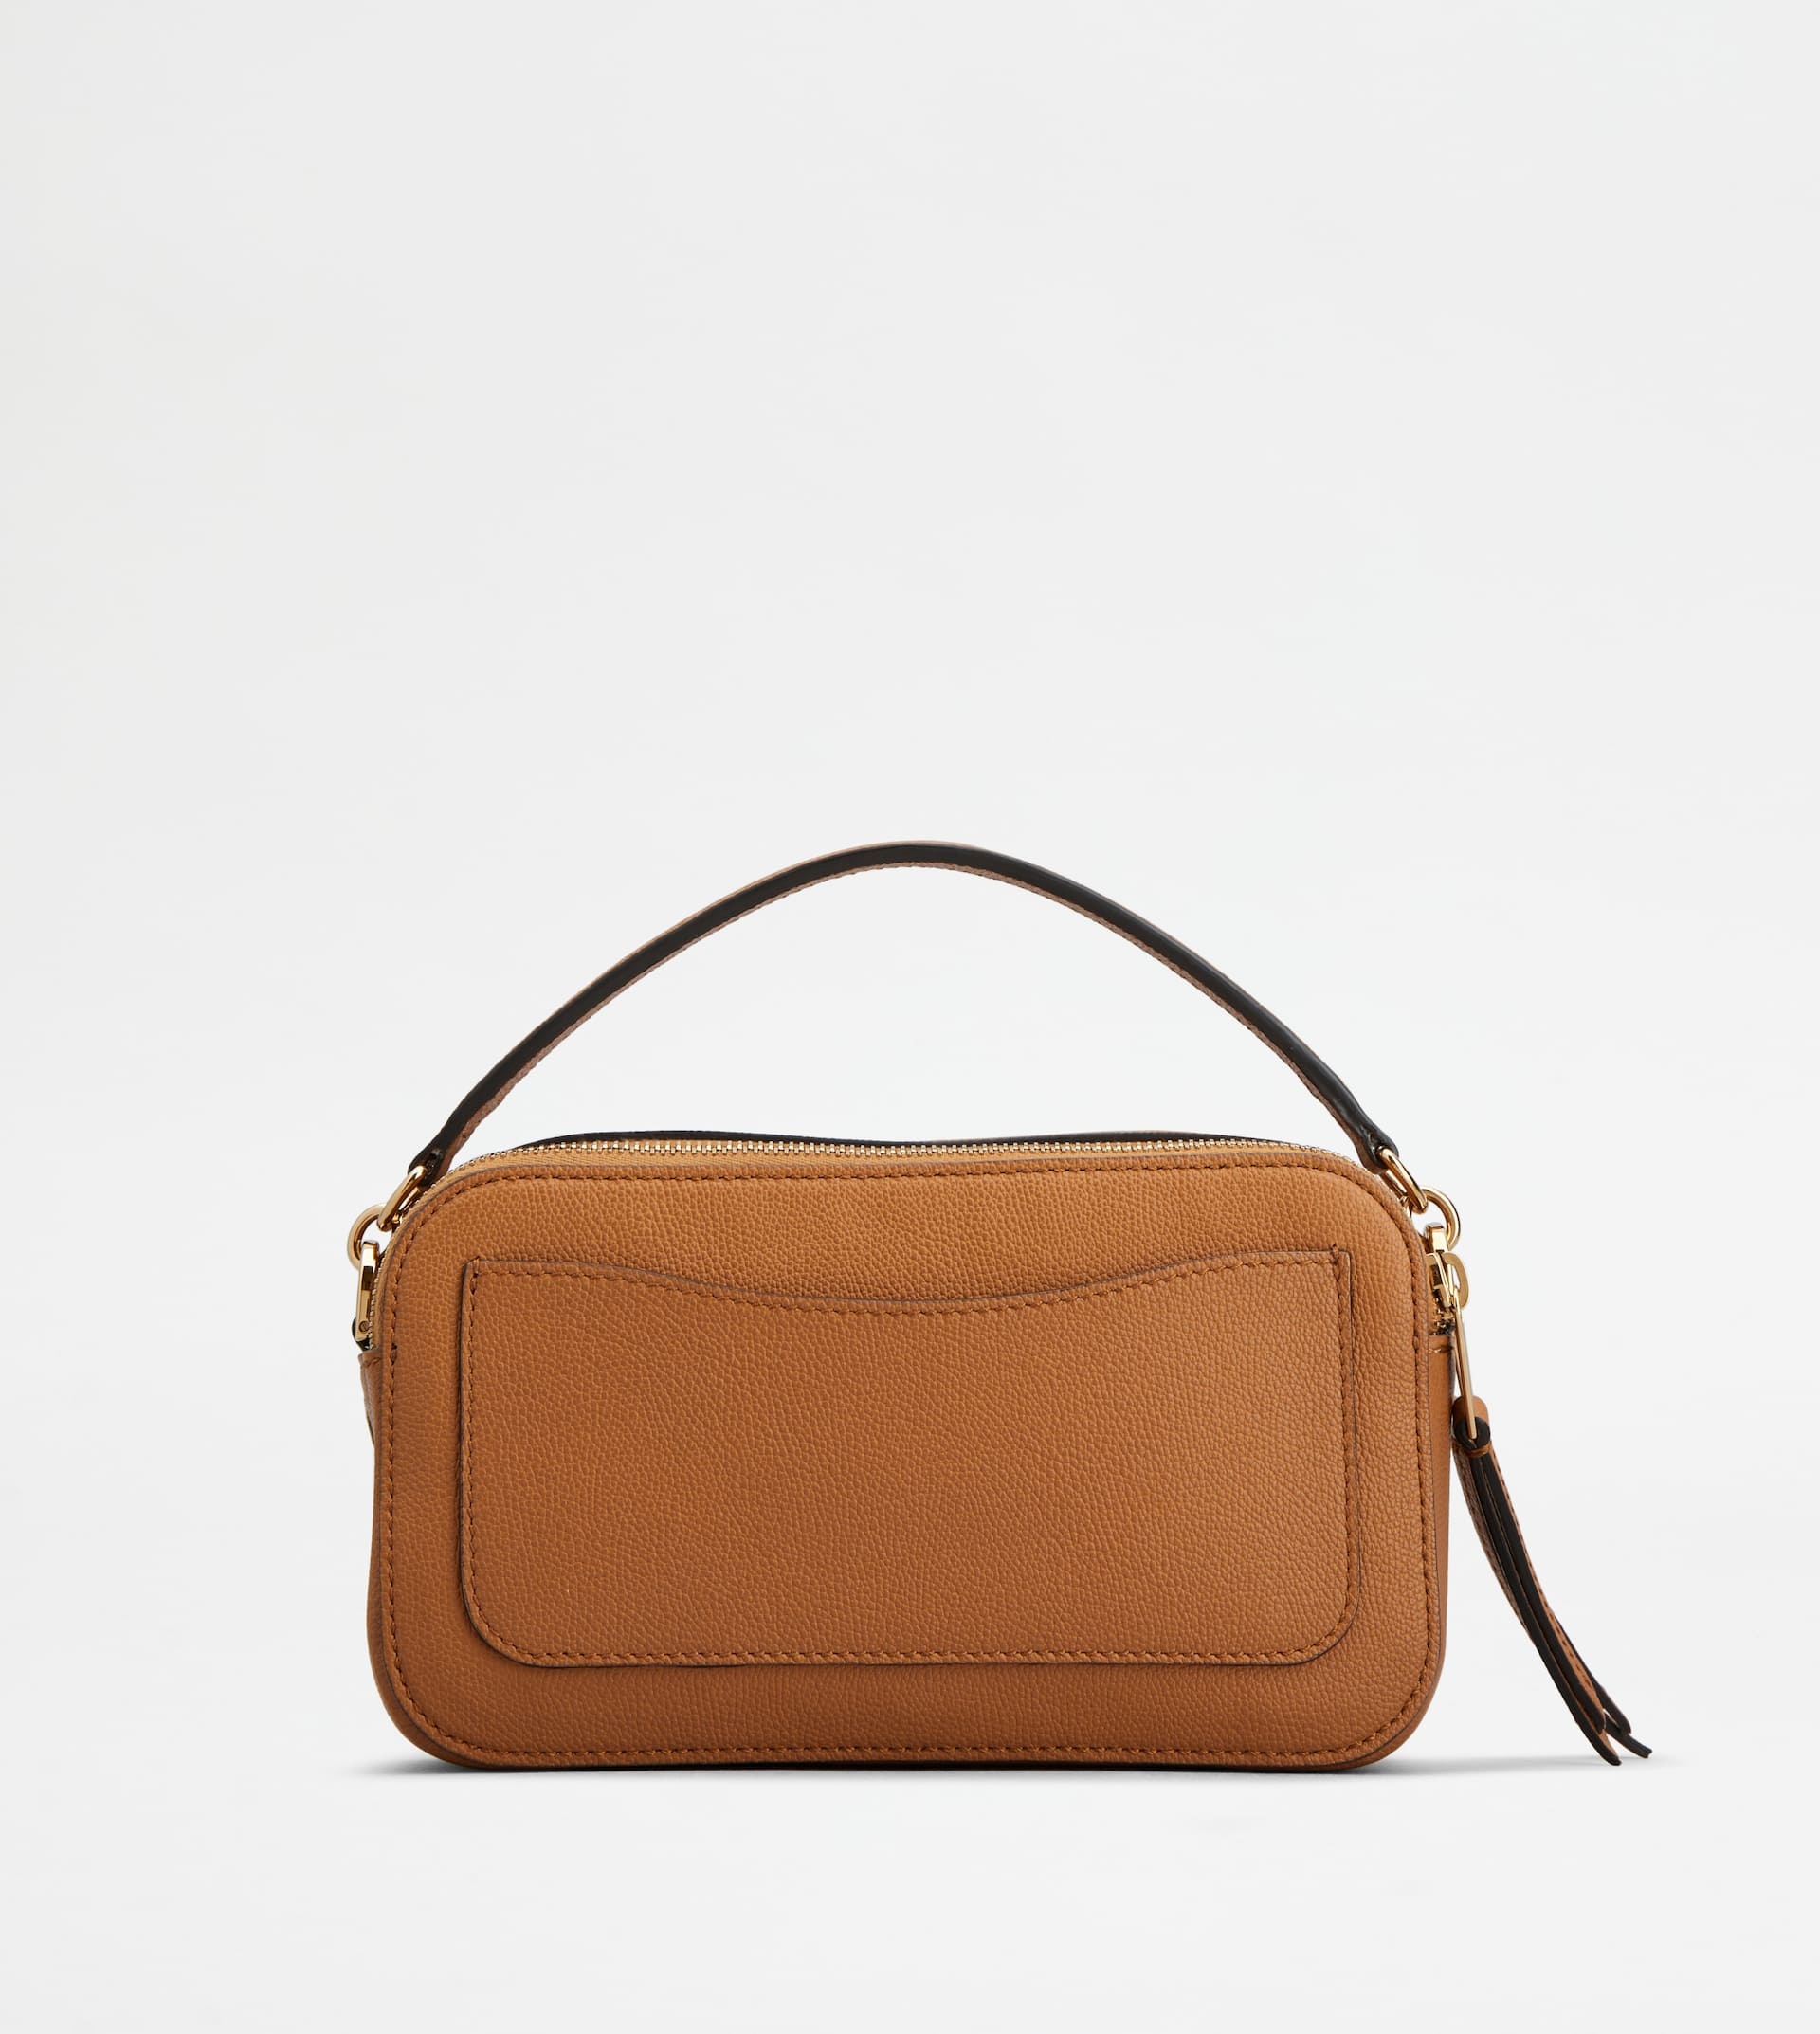 T TIMELESS CAMERA BAG IN LEATHER MINI - BROWN - 3